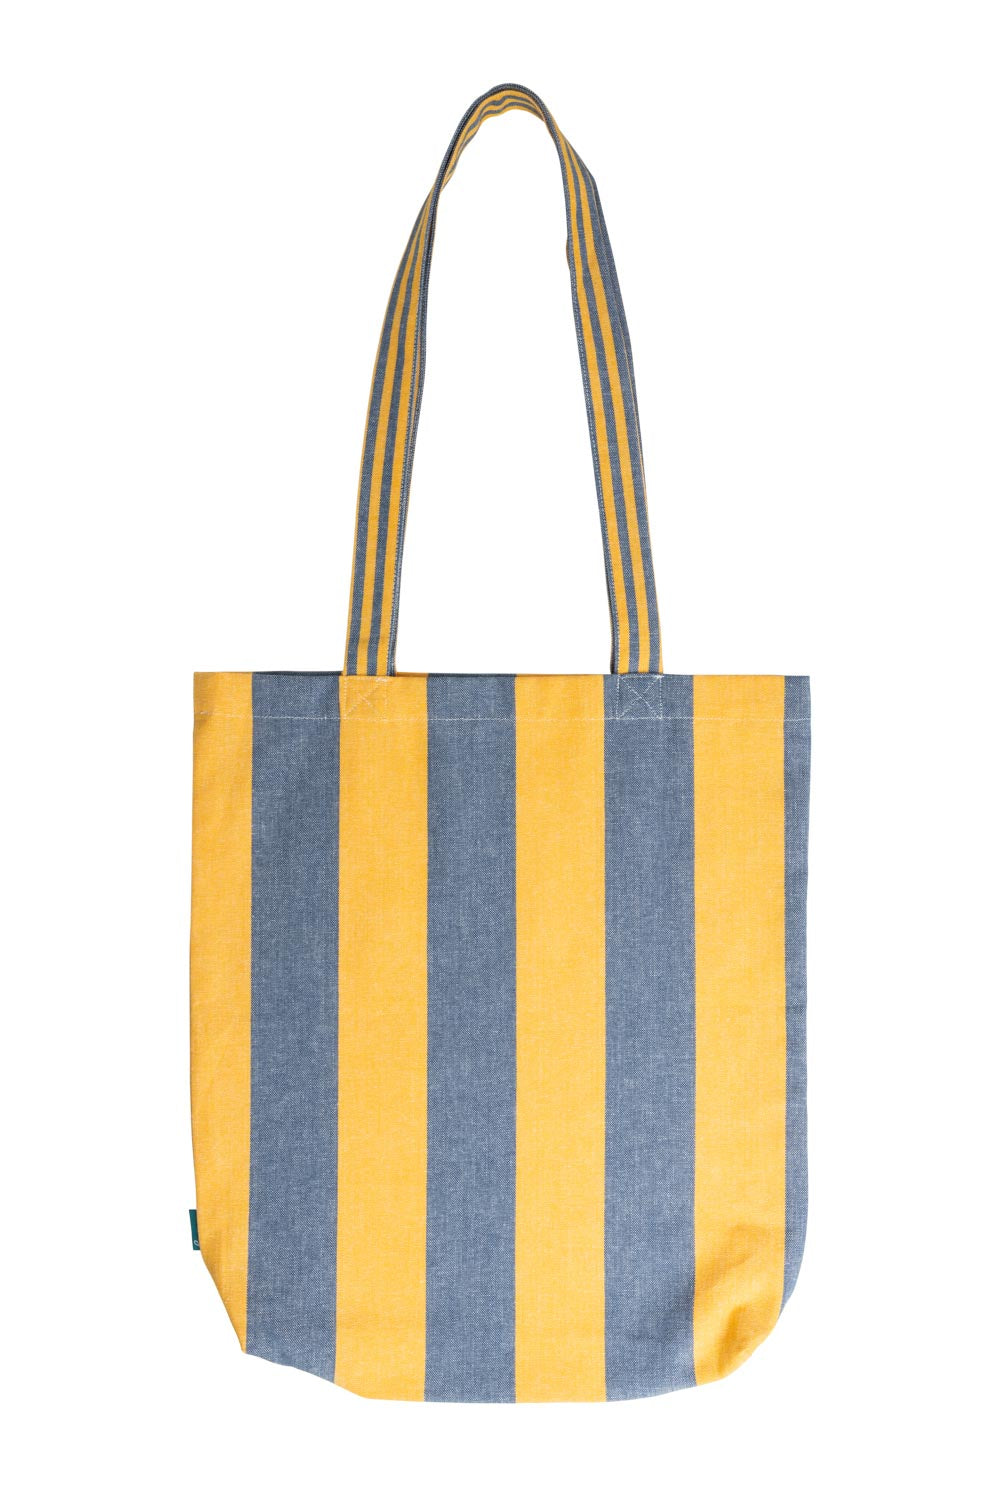 Shopping Bag in Yellow & Blue Stripes